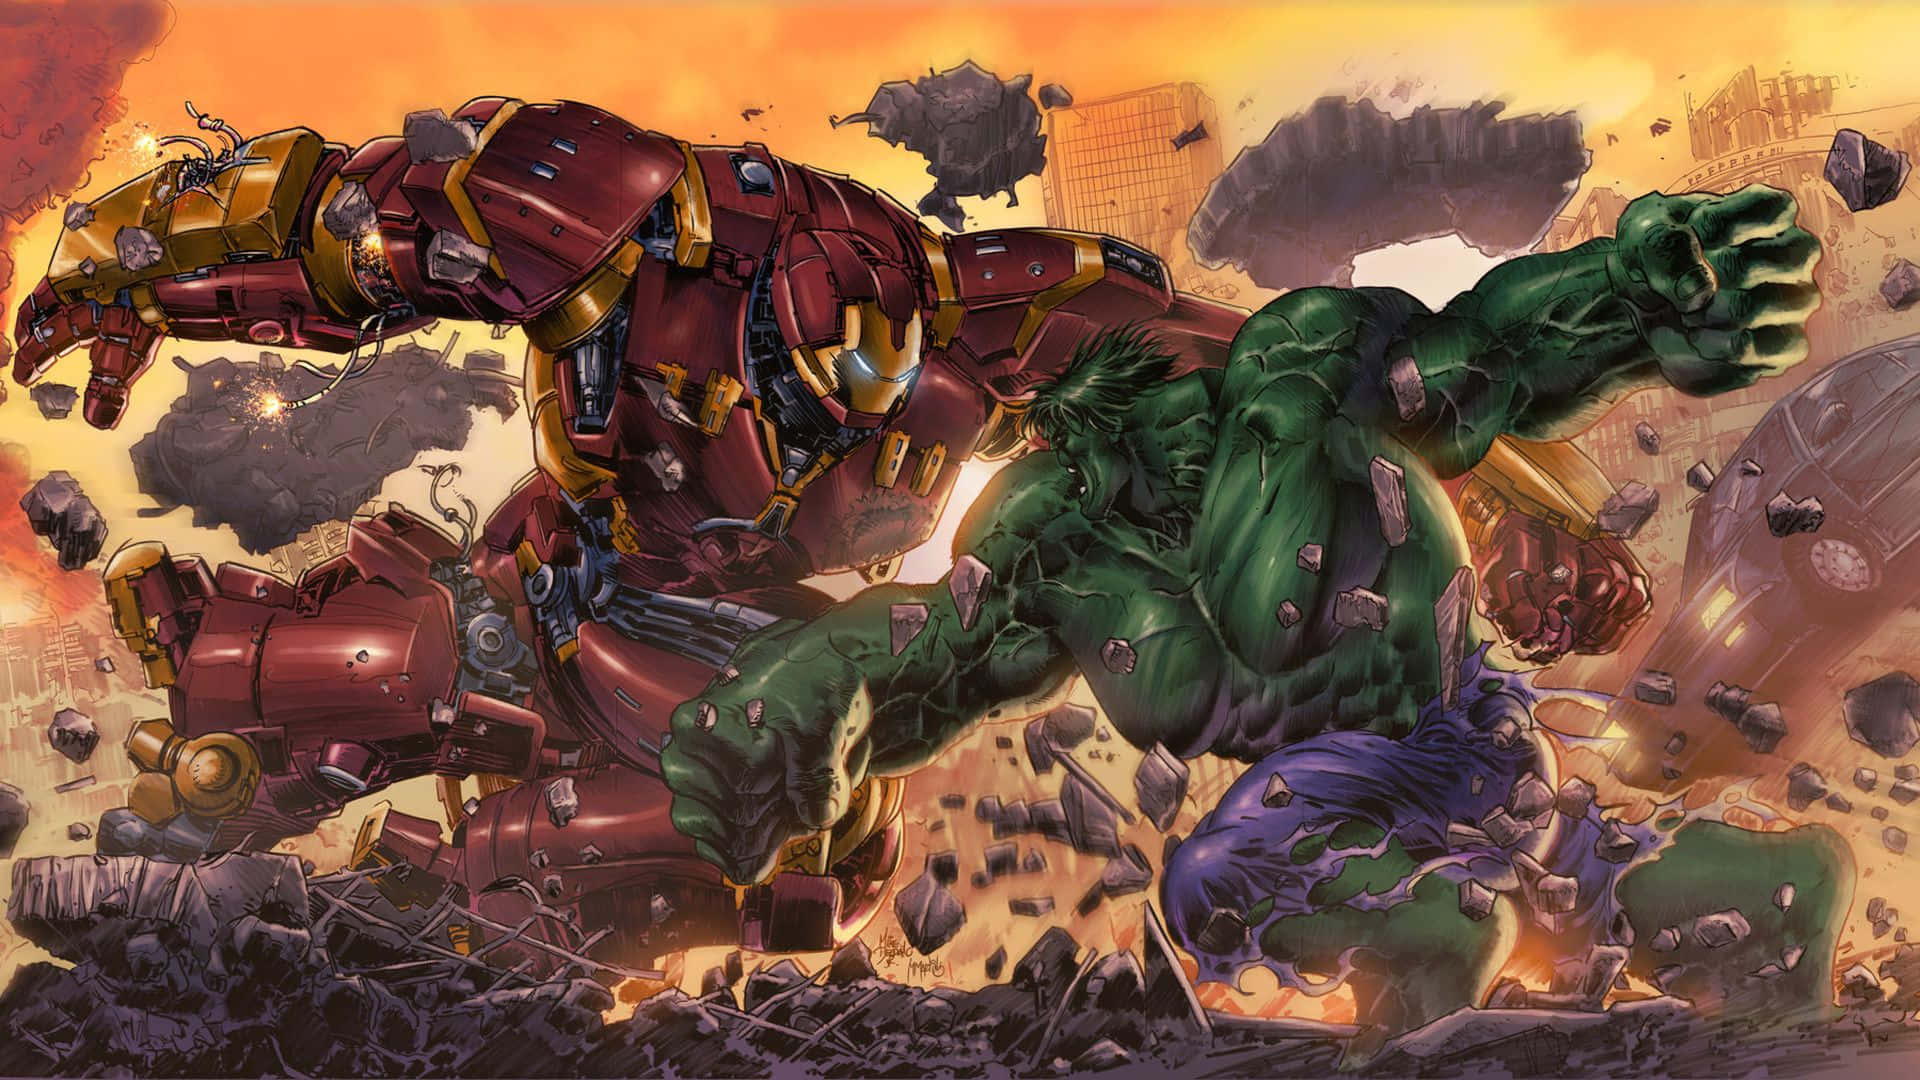 The epic battle between Iron Man and the Incredible Hulk starts now!" Wallpaper